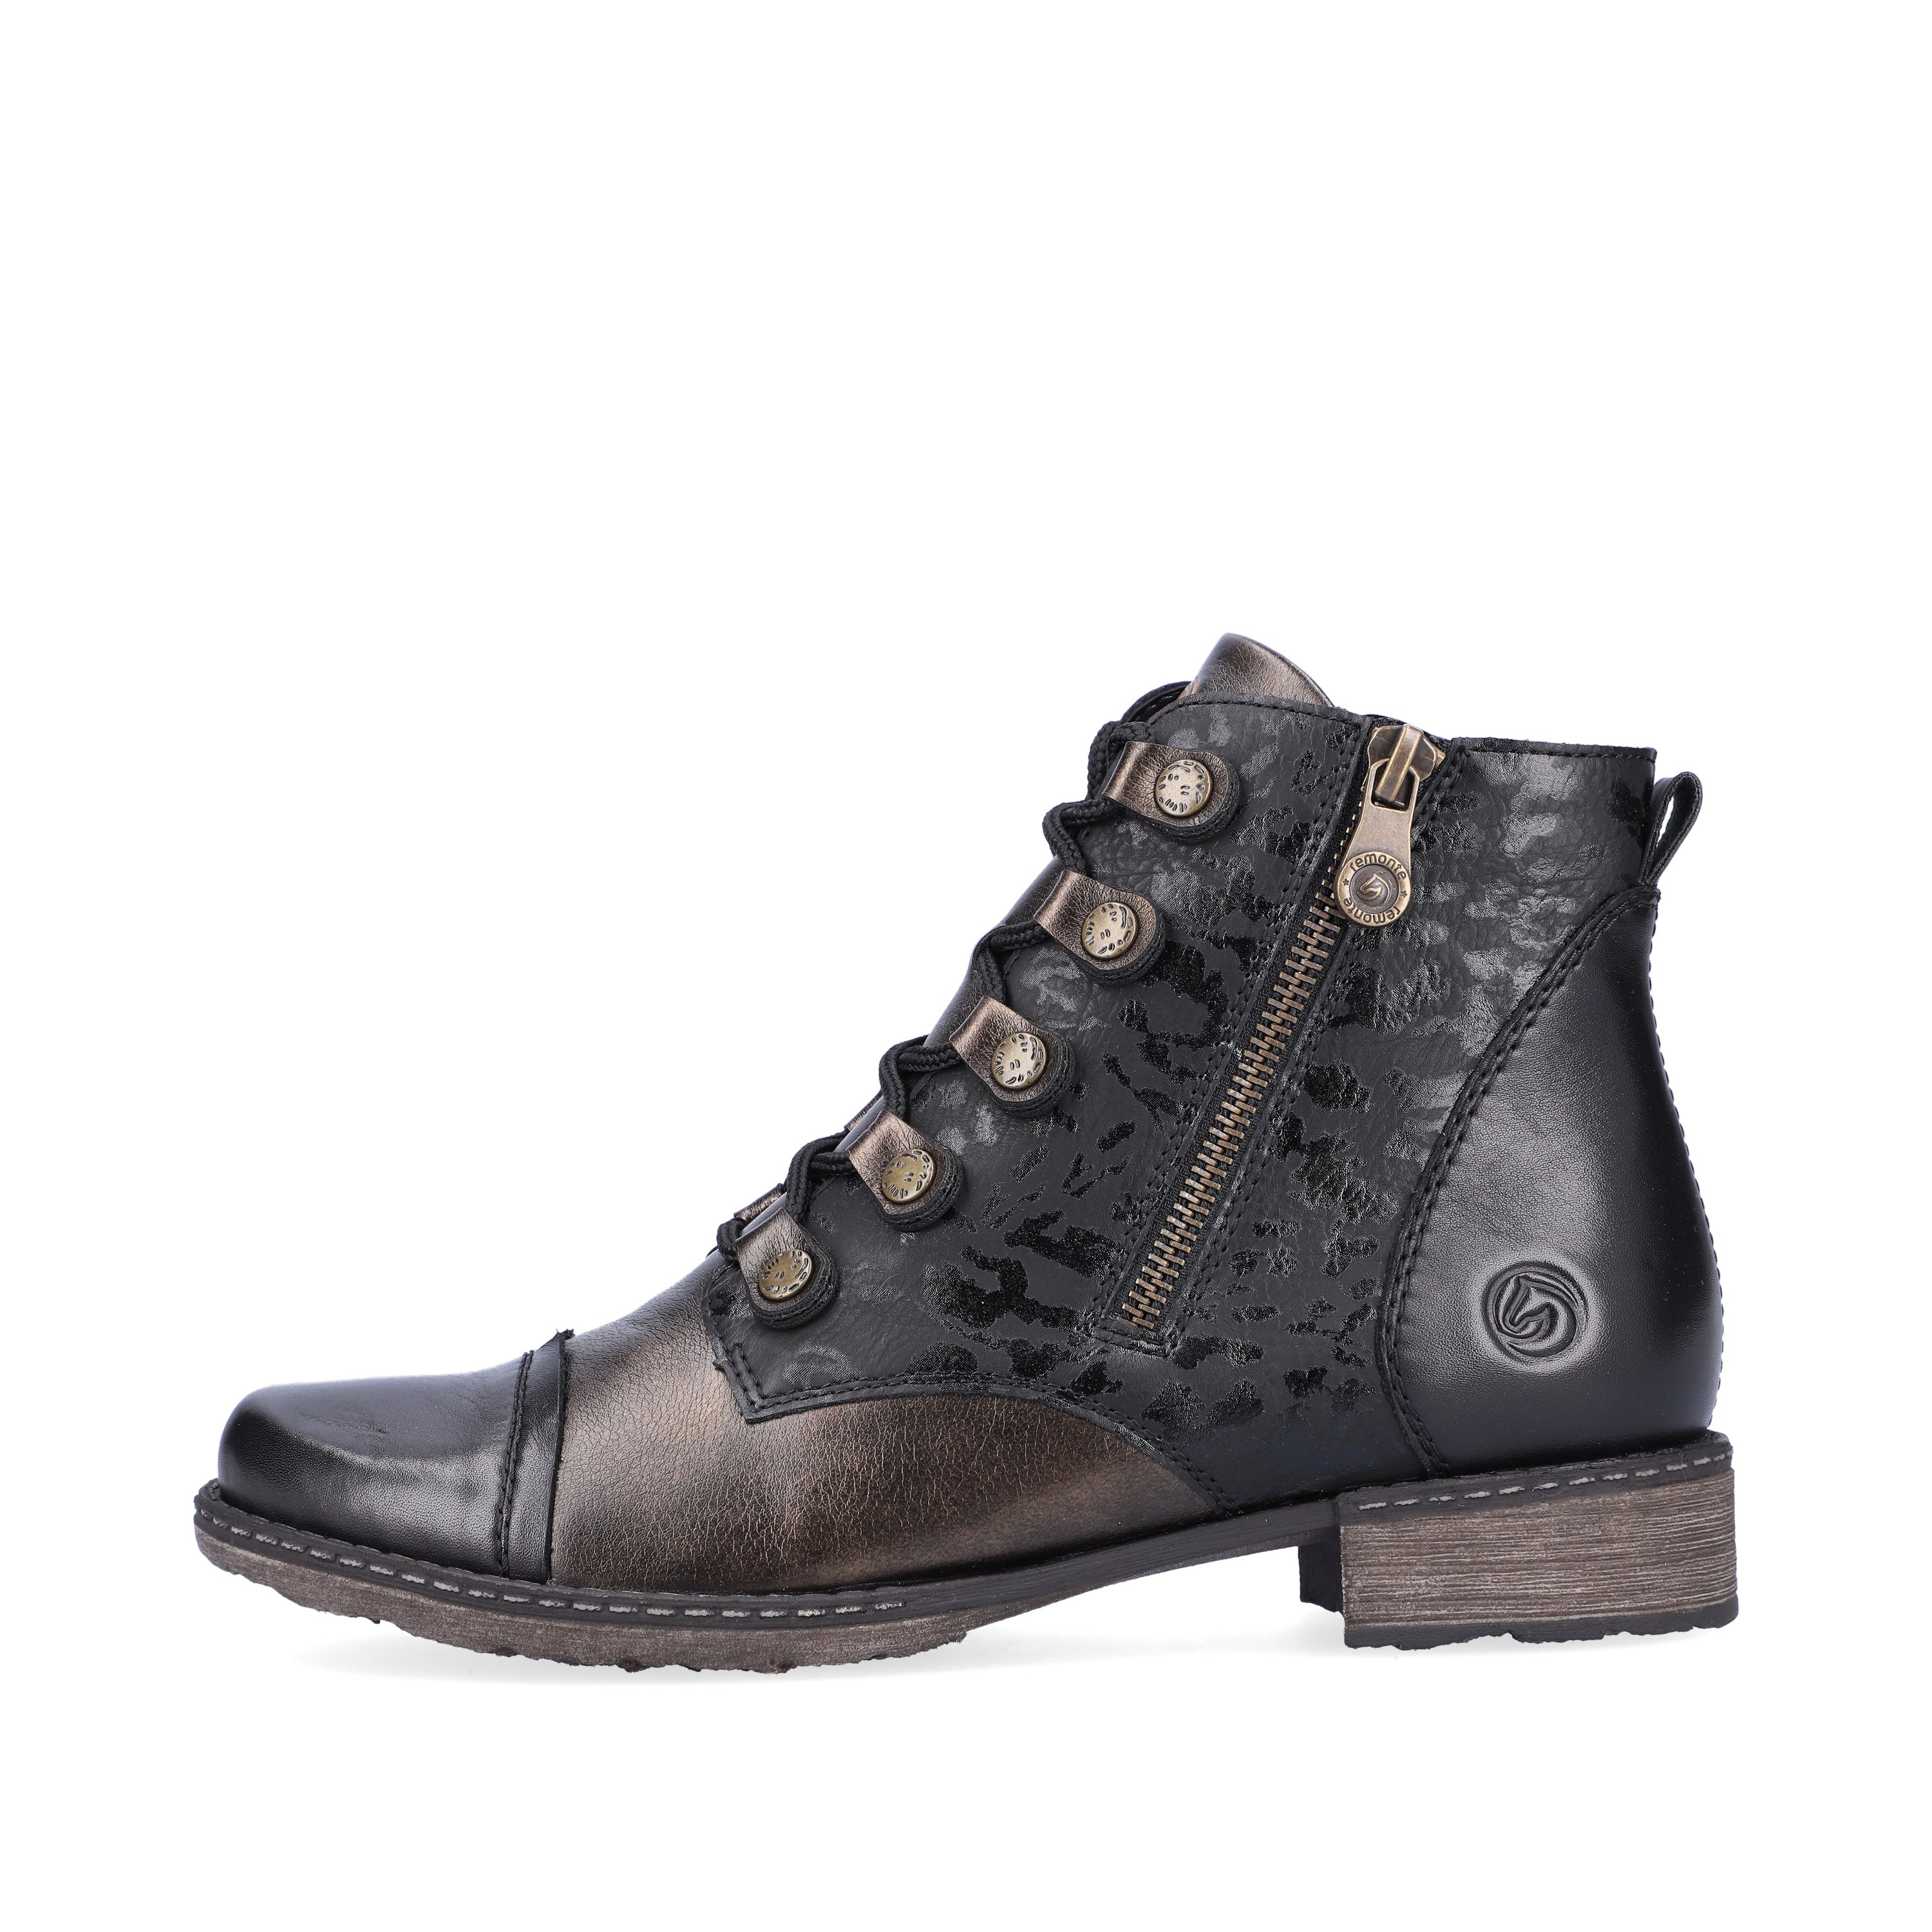 Black remonte women´s lace-up boots D4391-02 with hard-wearing profile sole. The outside of the shoe